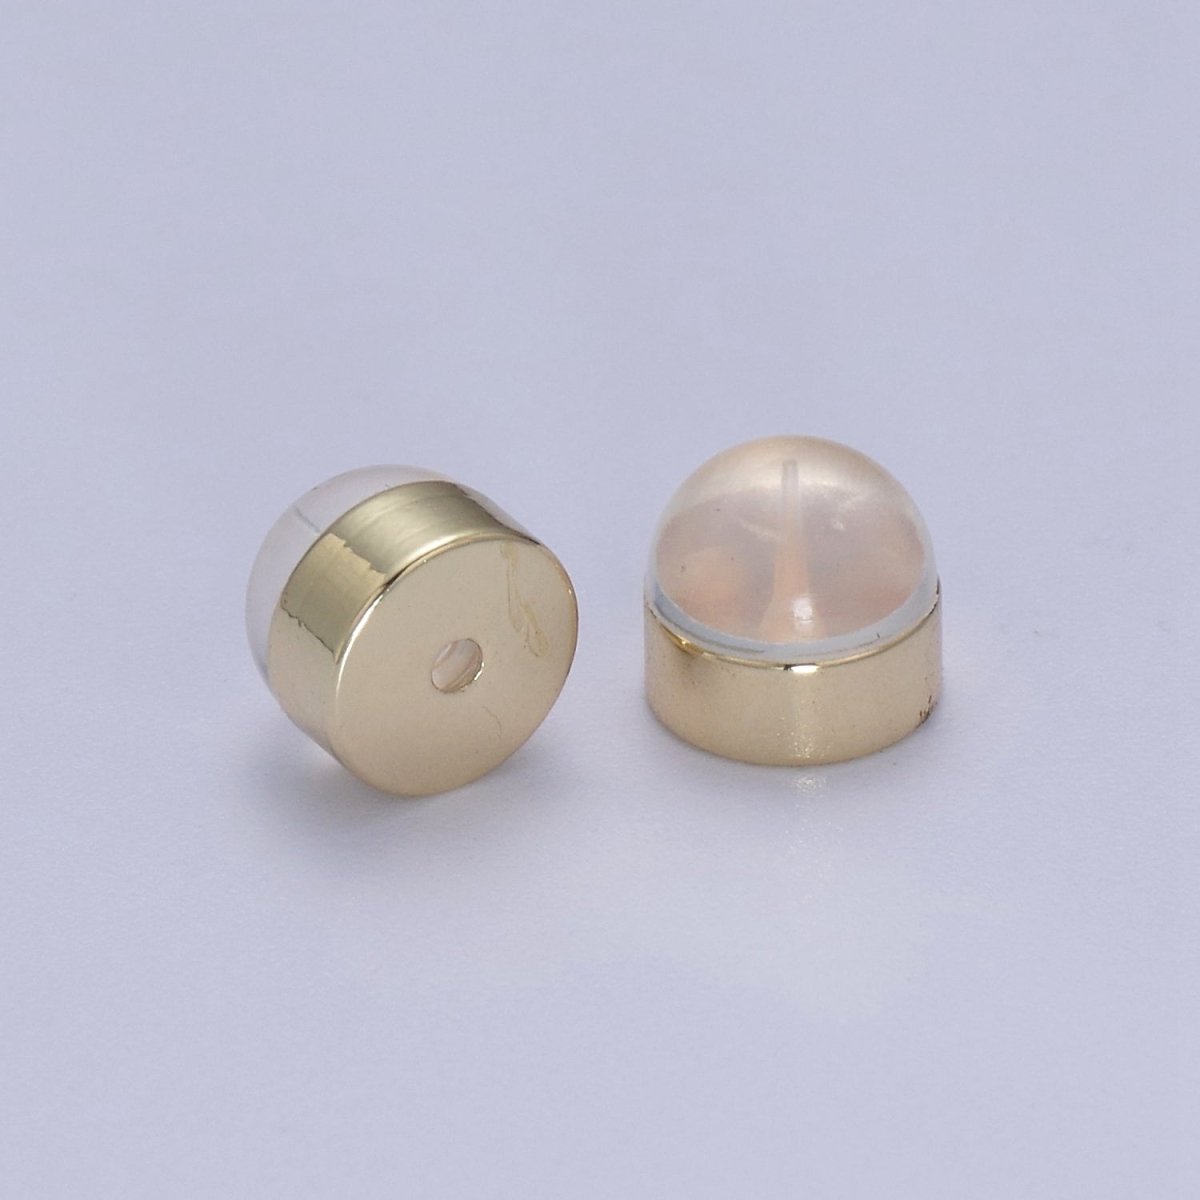 Soft Silicone Earring Backs for Studs Gold/Silver Rubber Earring Backs Replacements Hypoallergenic Safety Plastic Earring Back for Earring K-217 - DLUXCA